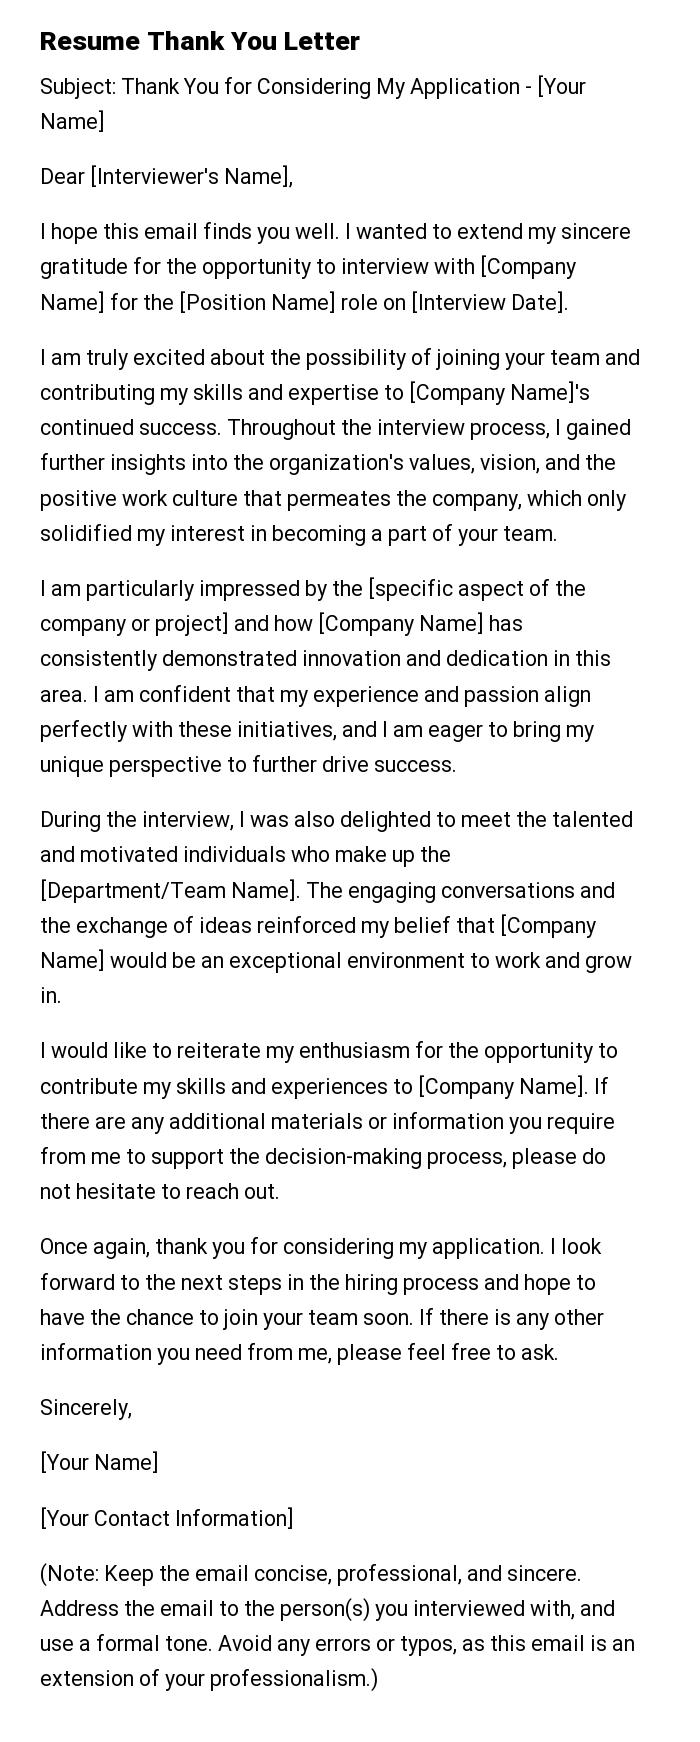 Resume Thank You Letter